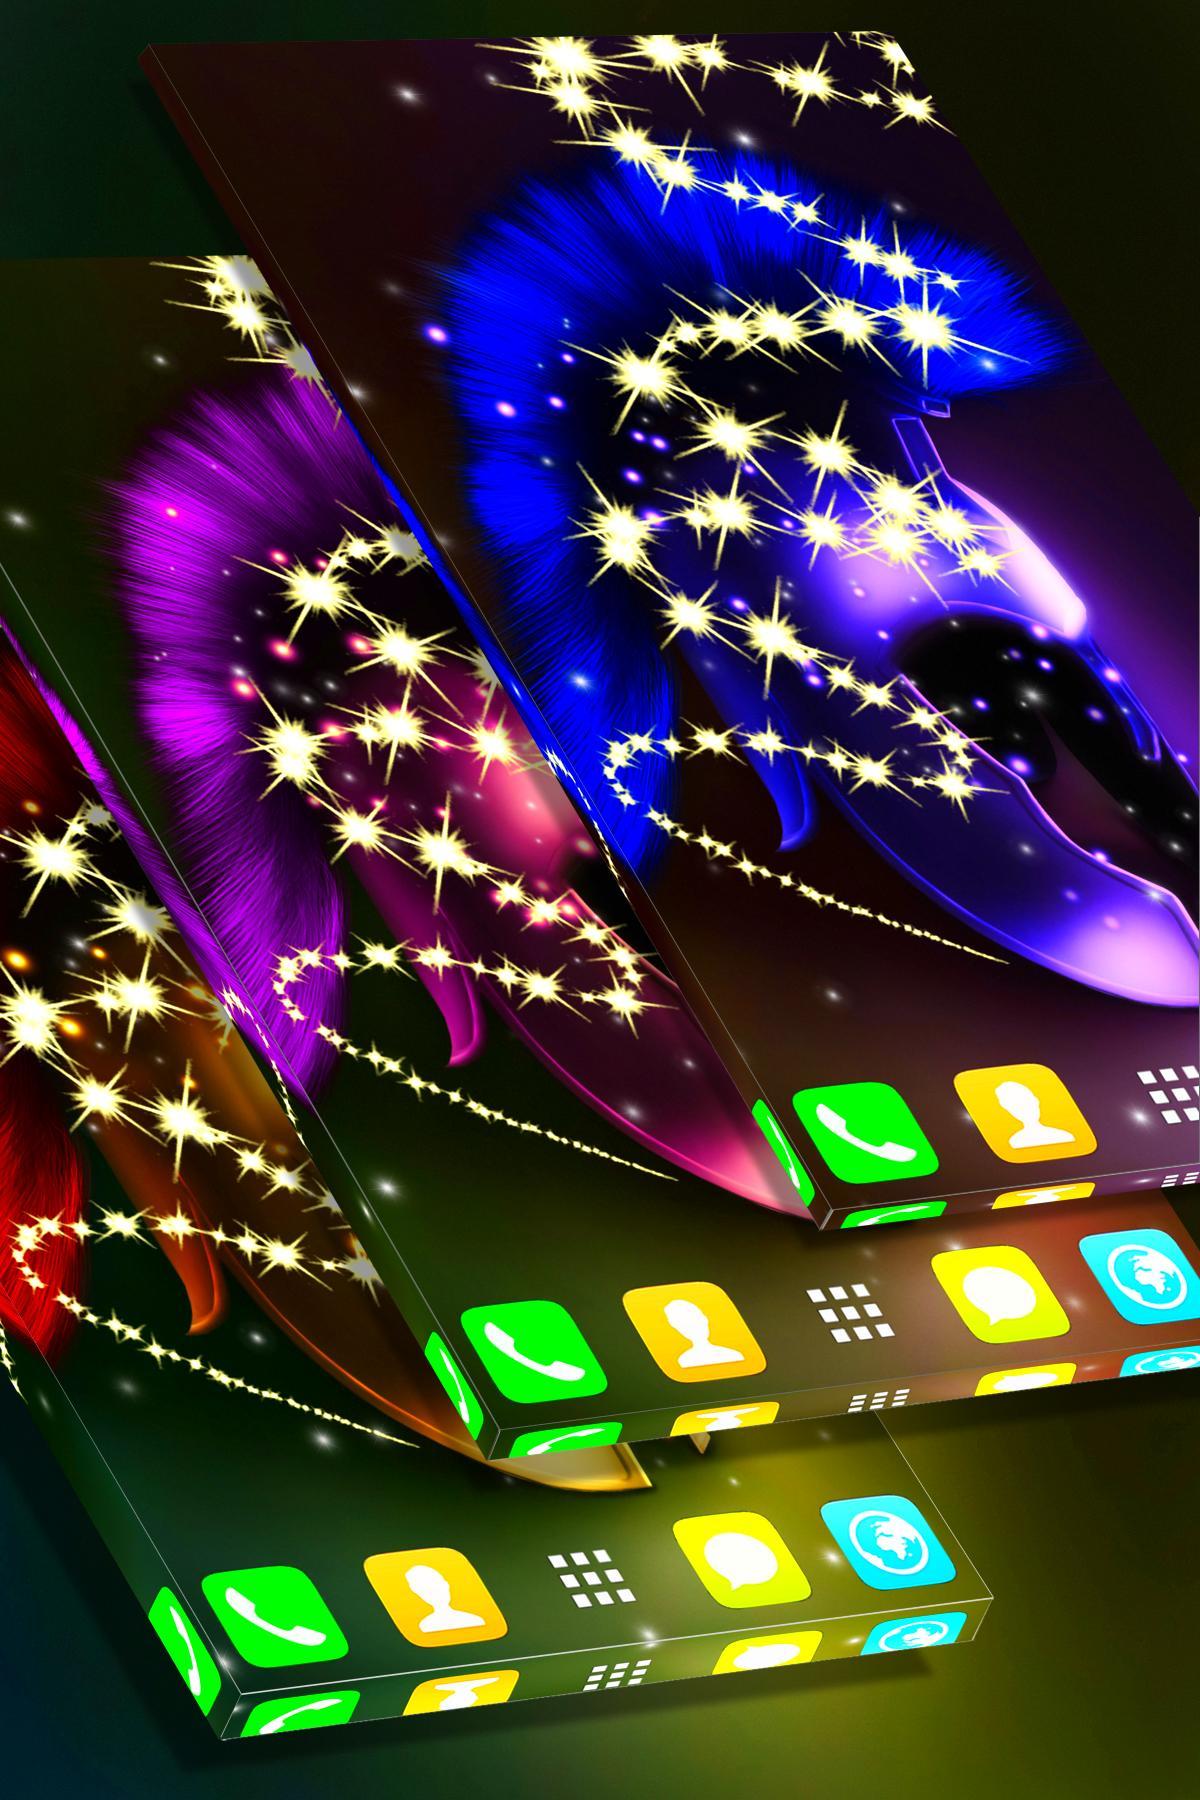  Wallpaper  Hidup  HD  for Android APK Download